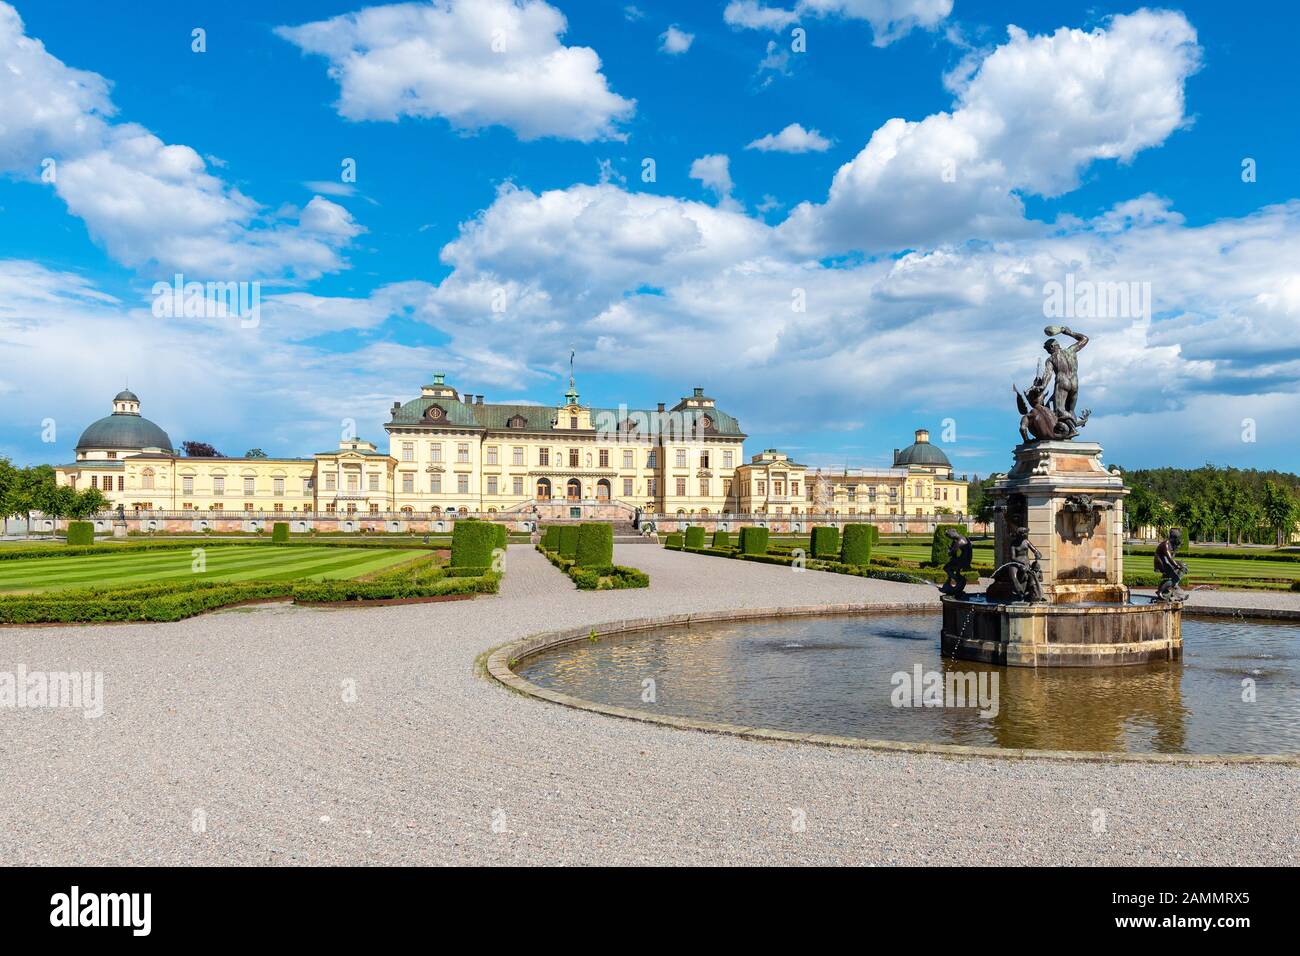 STOCKHOLM,SWEDEN-JULY14,2019: Scenic outdoor view of Drottningholm palace in summer season at Stockholm, Sweden, it is one of Sweden's Royal Palaces Stock Photo